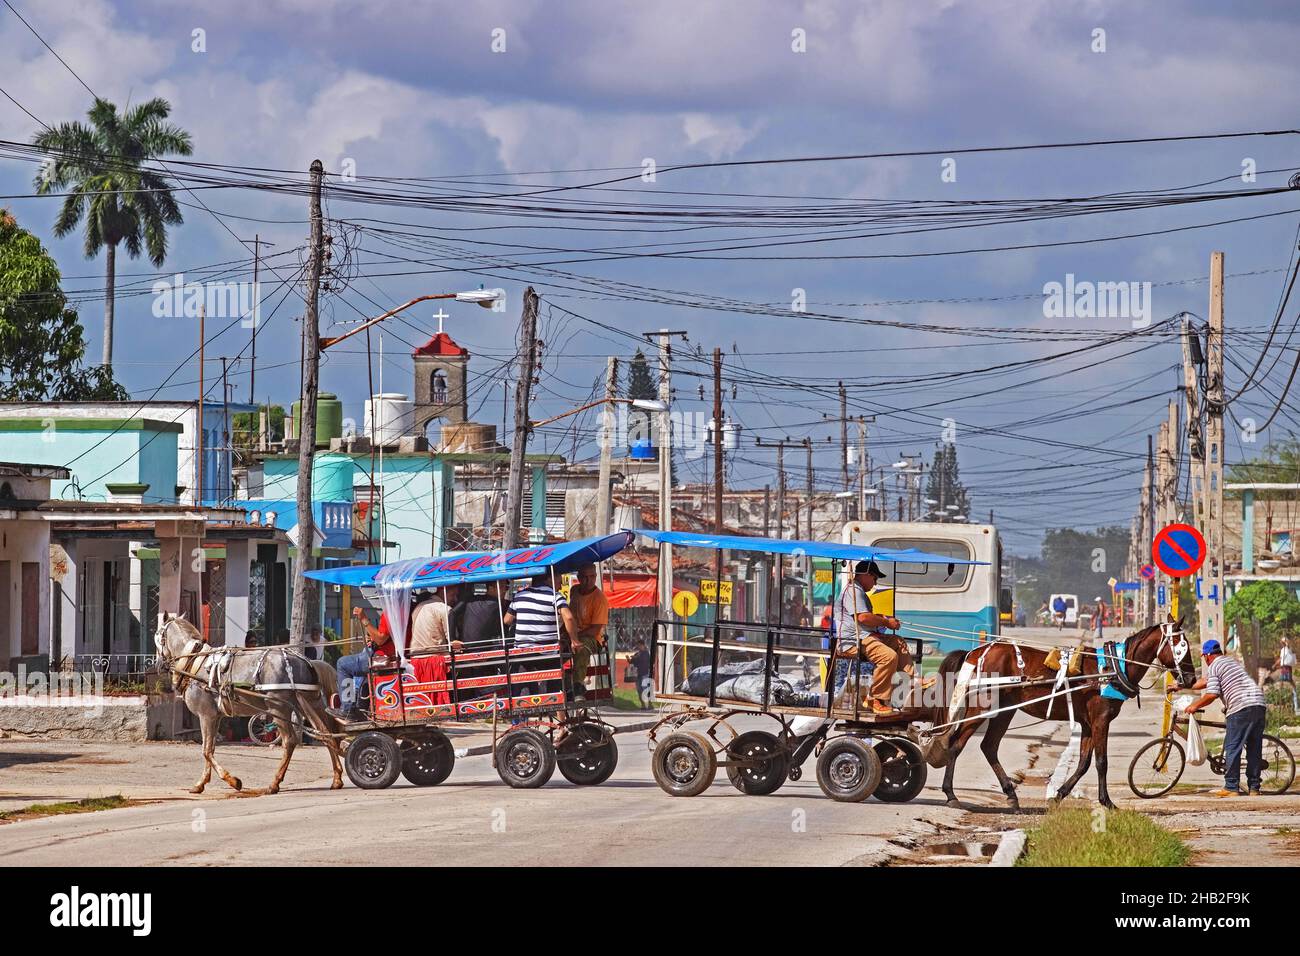 Horse-drawn carriage with passengers and horse with cart crossing road in the town Jatibonico, Sancti Spíritus Province on the island Cuba, Caribbean Stock Photo